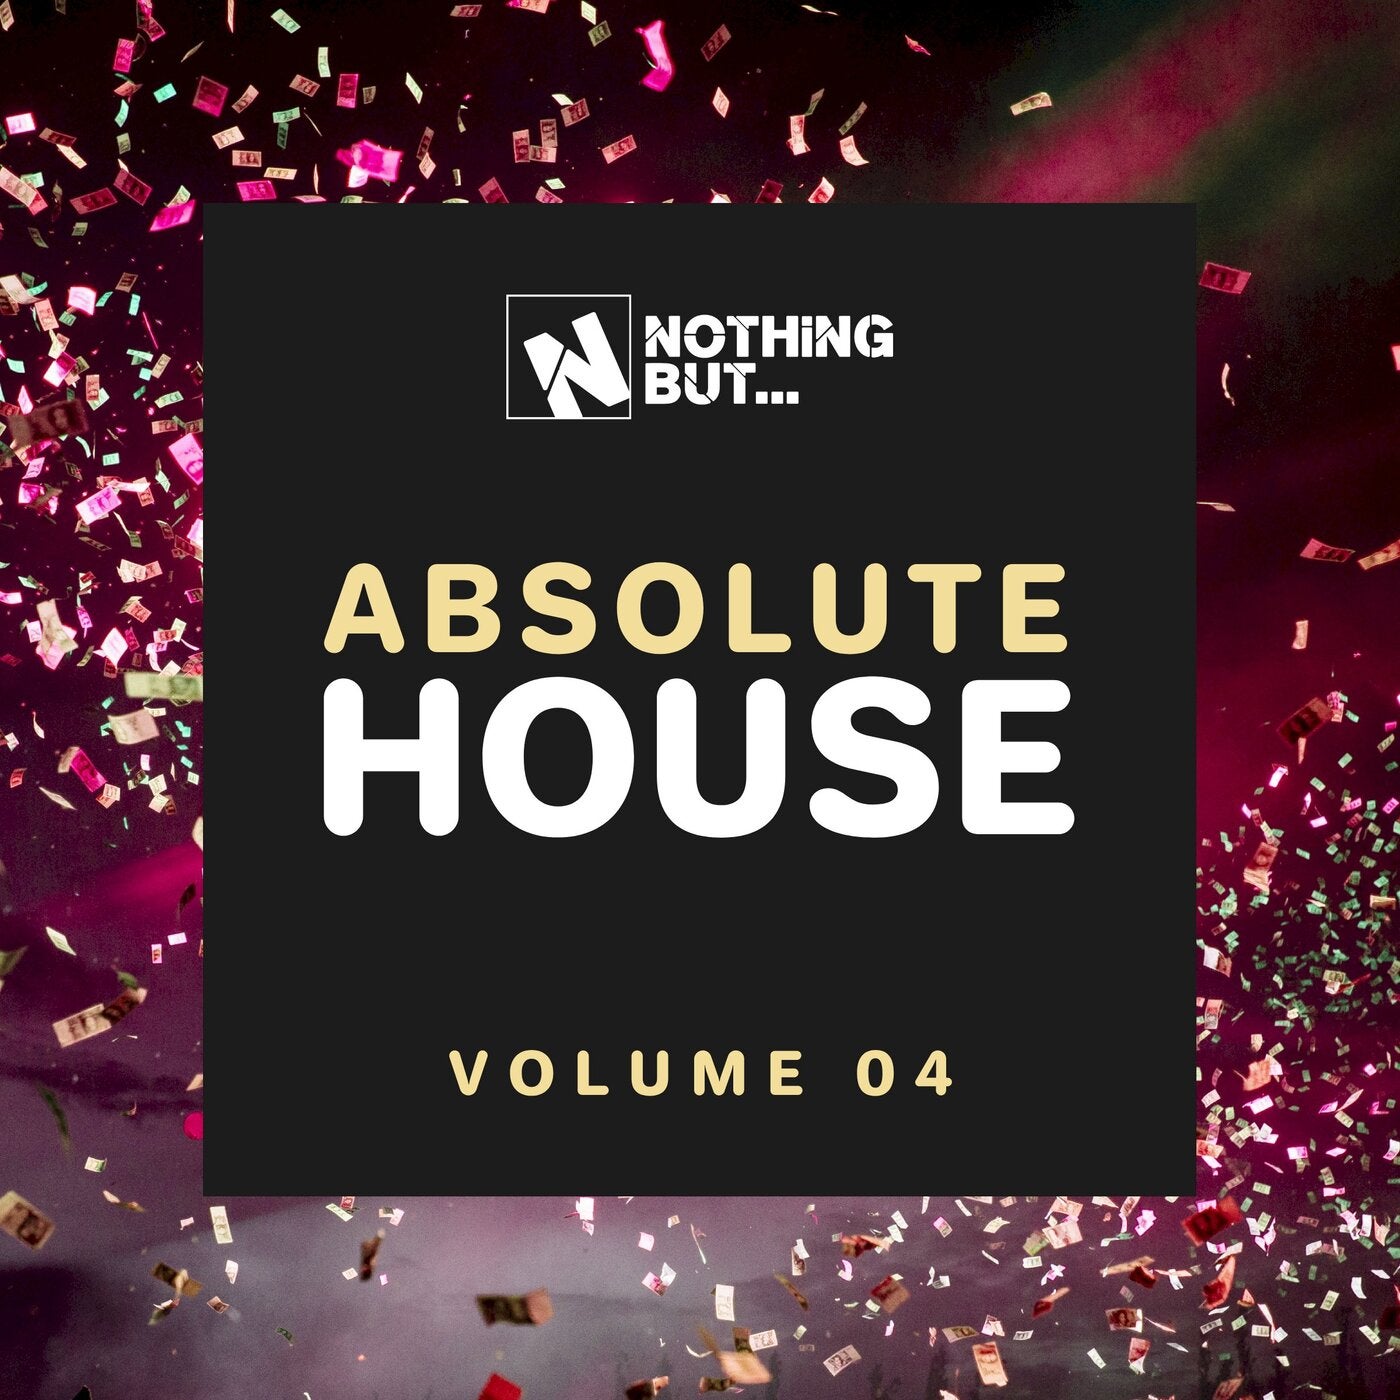 VA – Nothing But… Absolute House, Vol. 04 [NBABHS04]